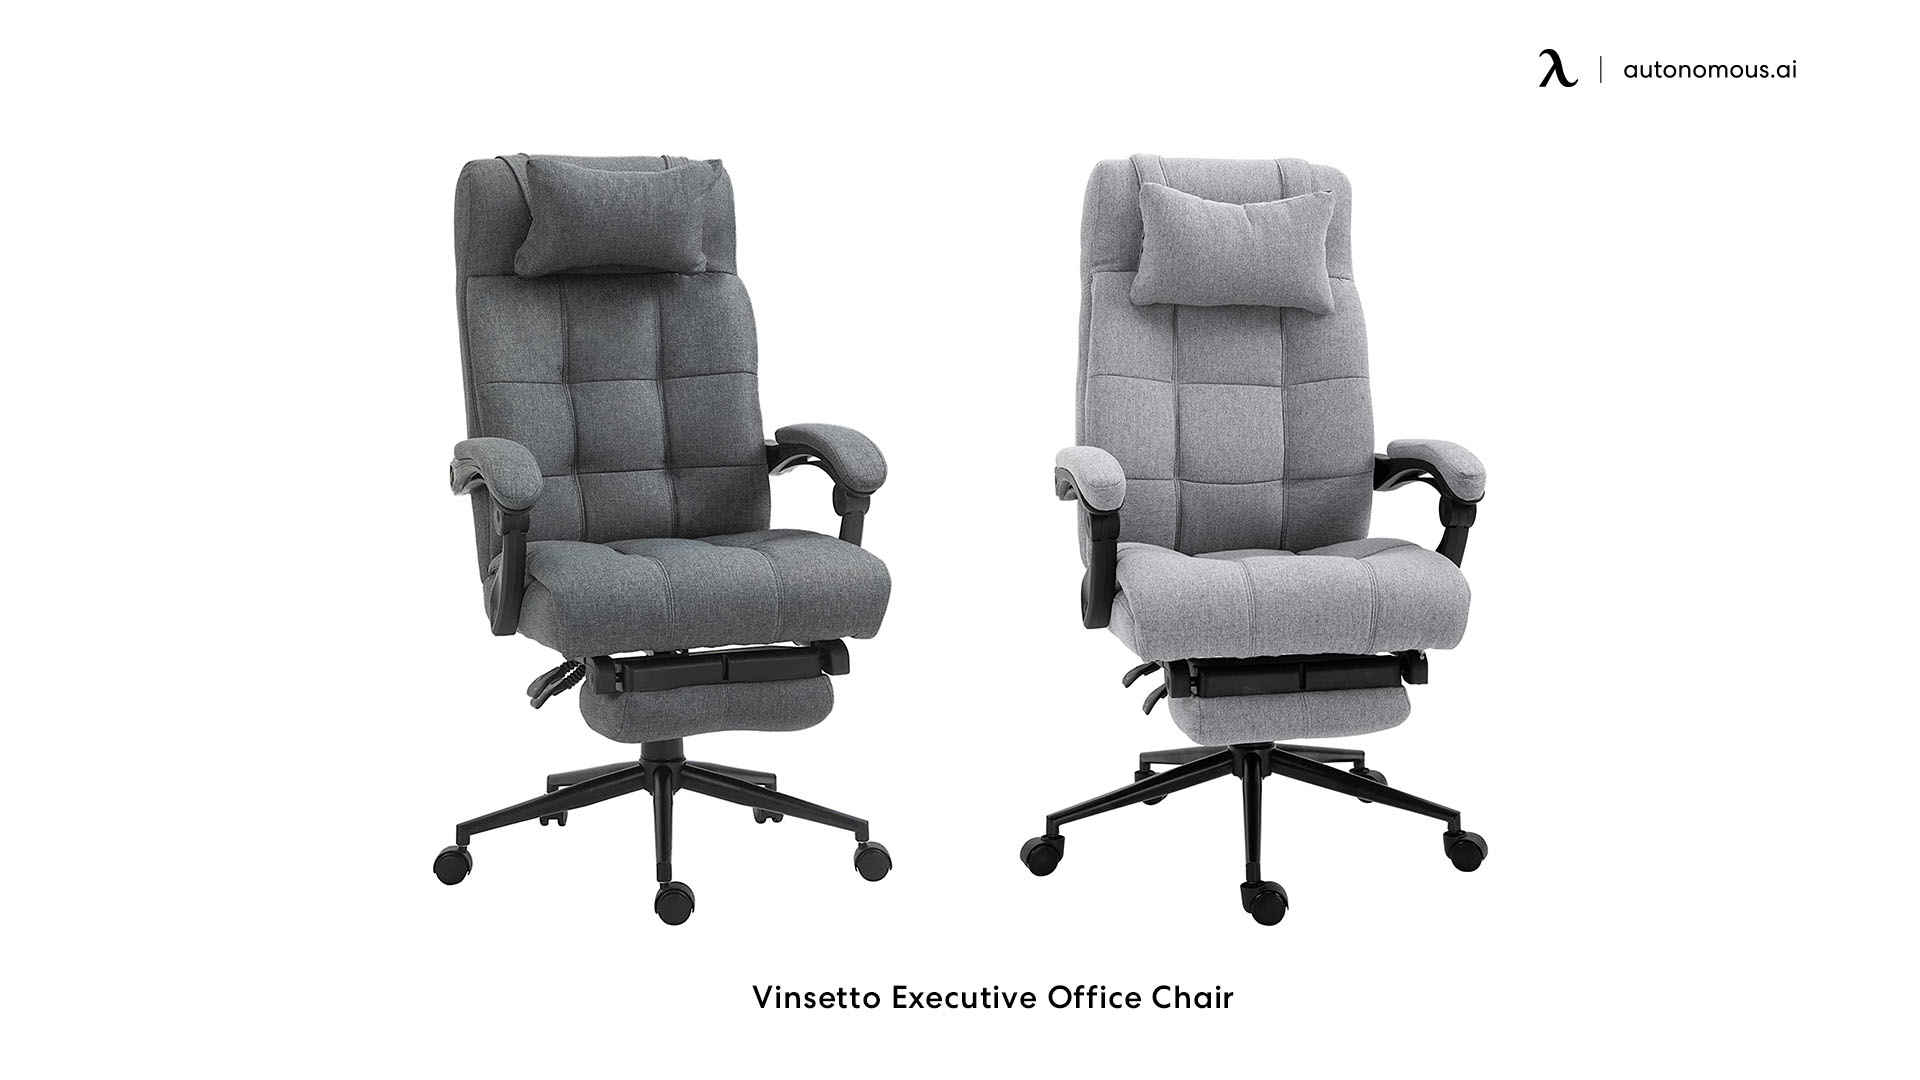 Vinsetto Executive Office Chair